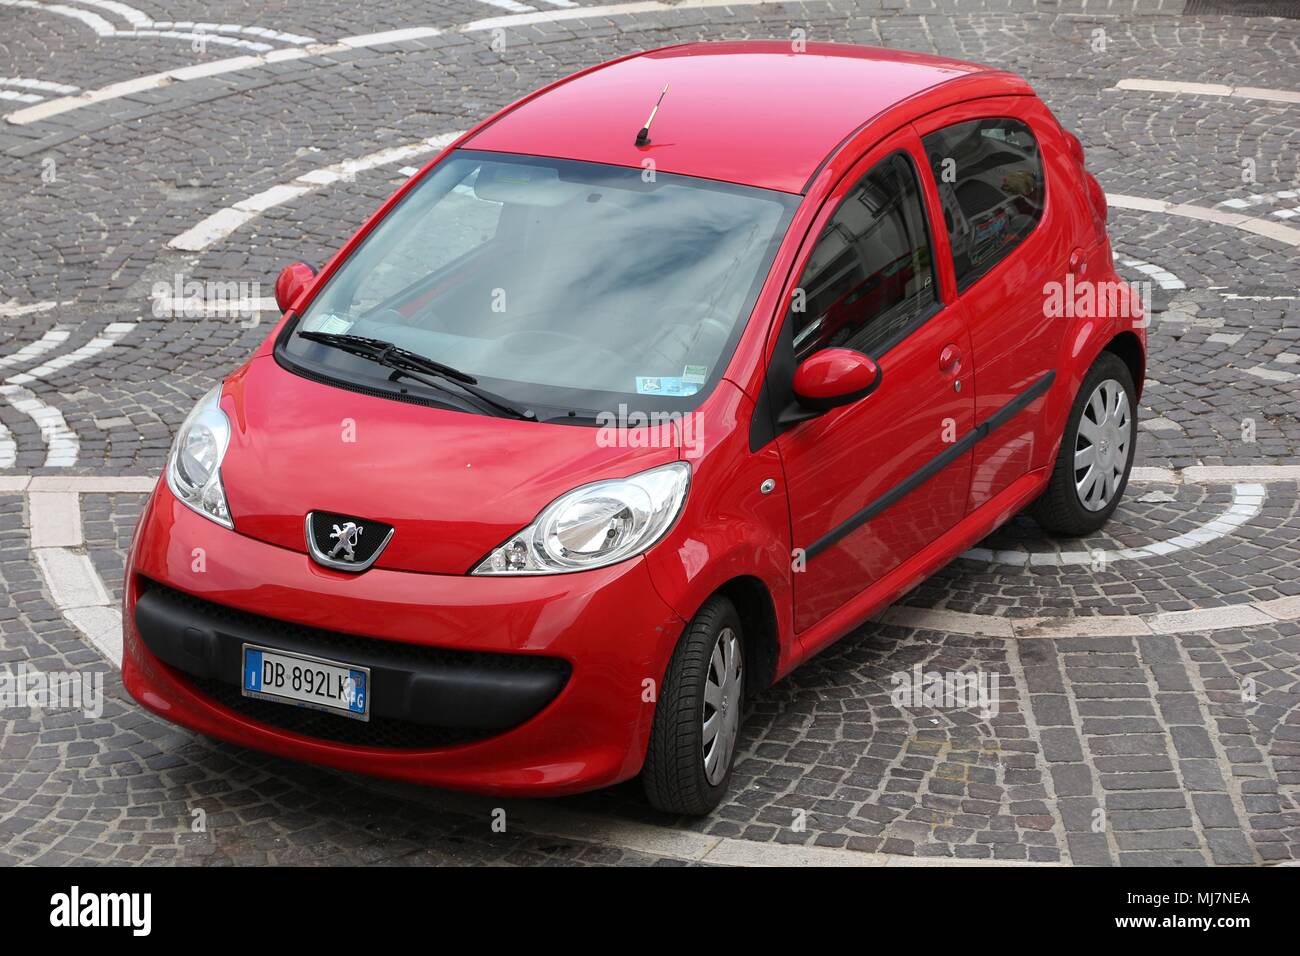 APULIA, ITALY - JUNE 6, 2017: Peugeot 107 red city car parked in Italy. There are 41 million motor vehicles registered in Italy. Stock Photo